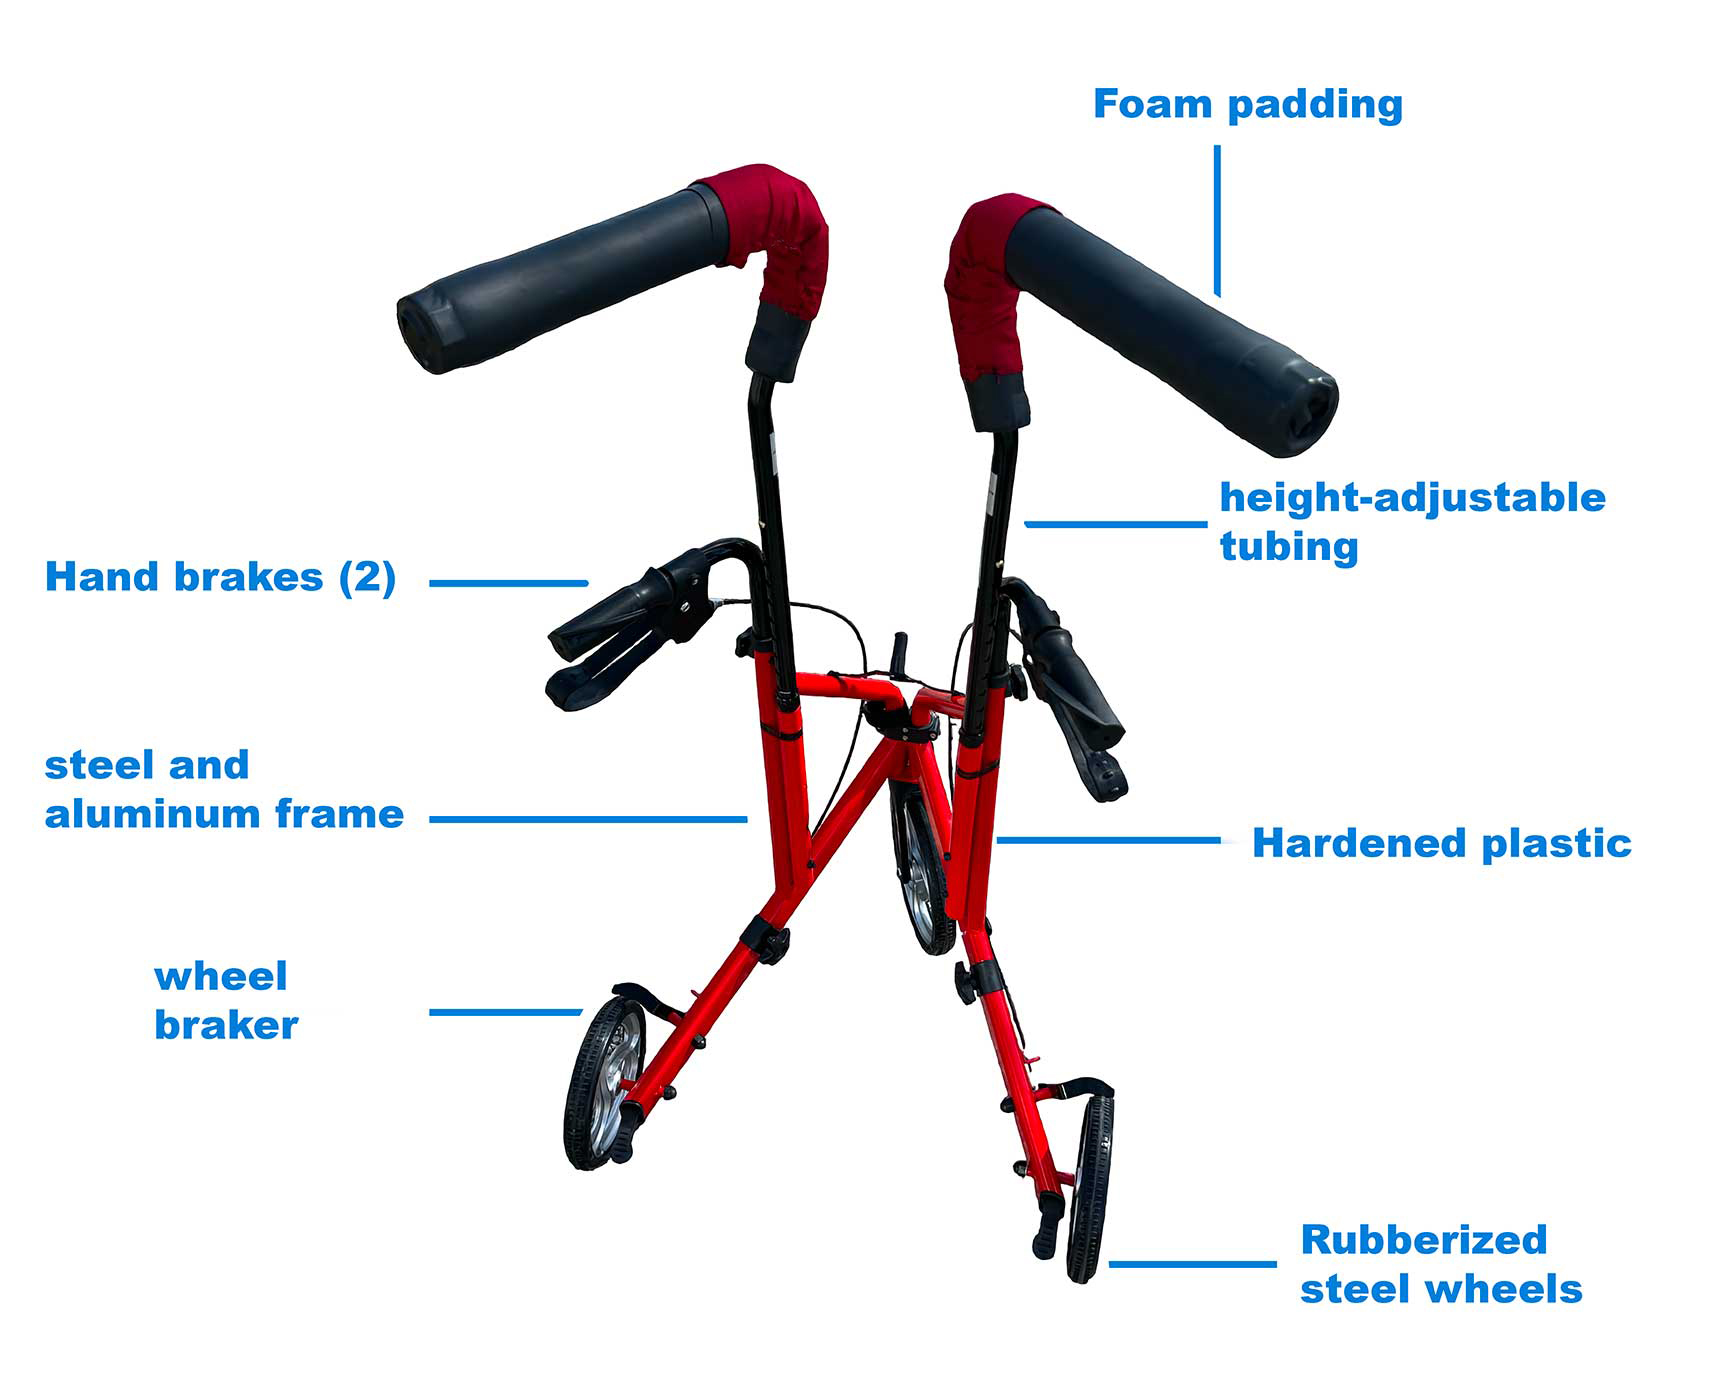 Materials and Construction of the MOJO Superwalker®